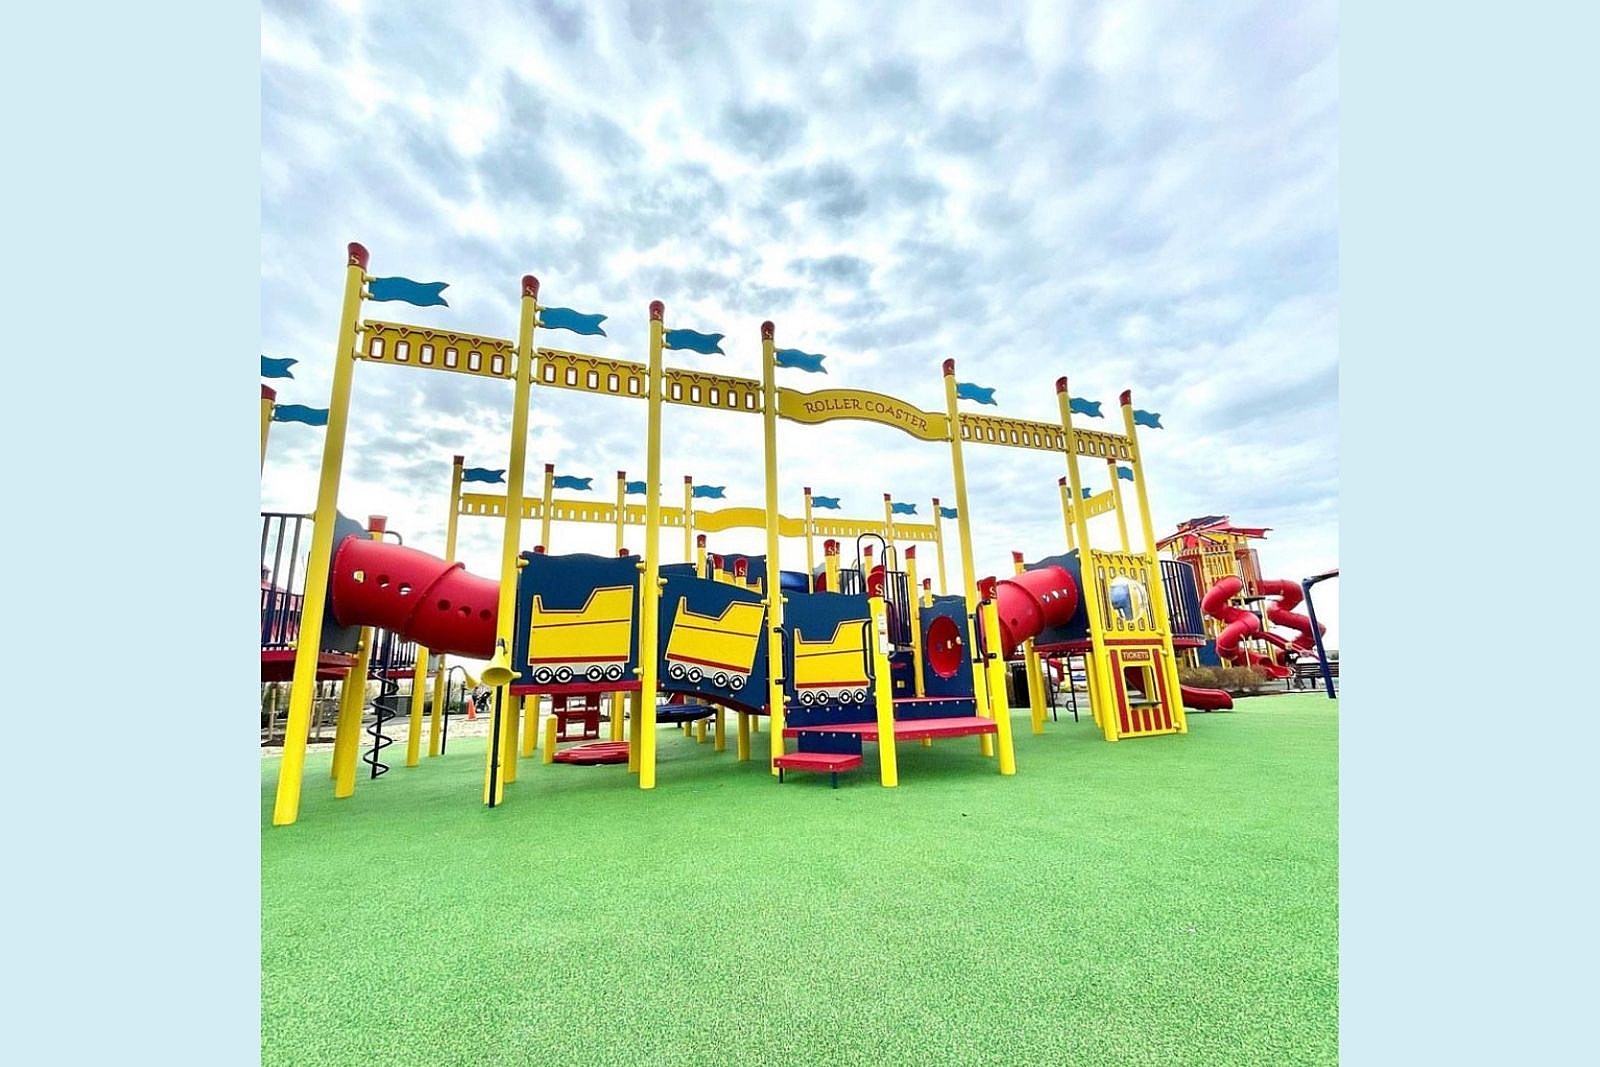 Where to find the best free playgrounds and parks in NJ